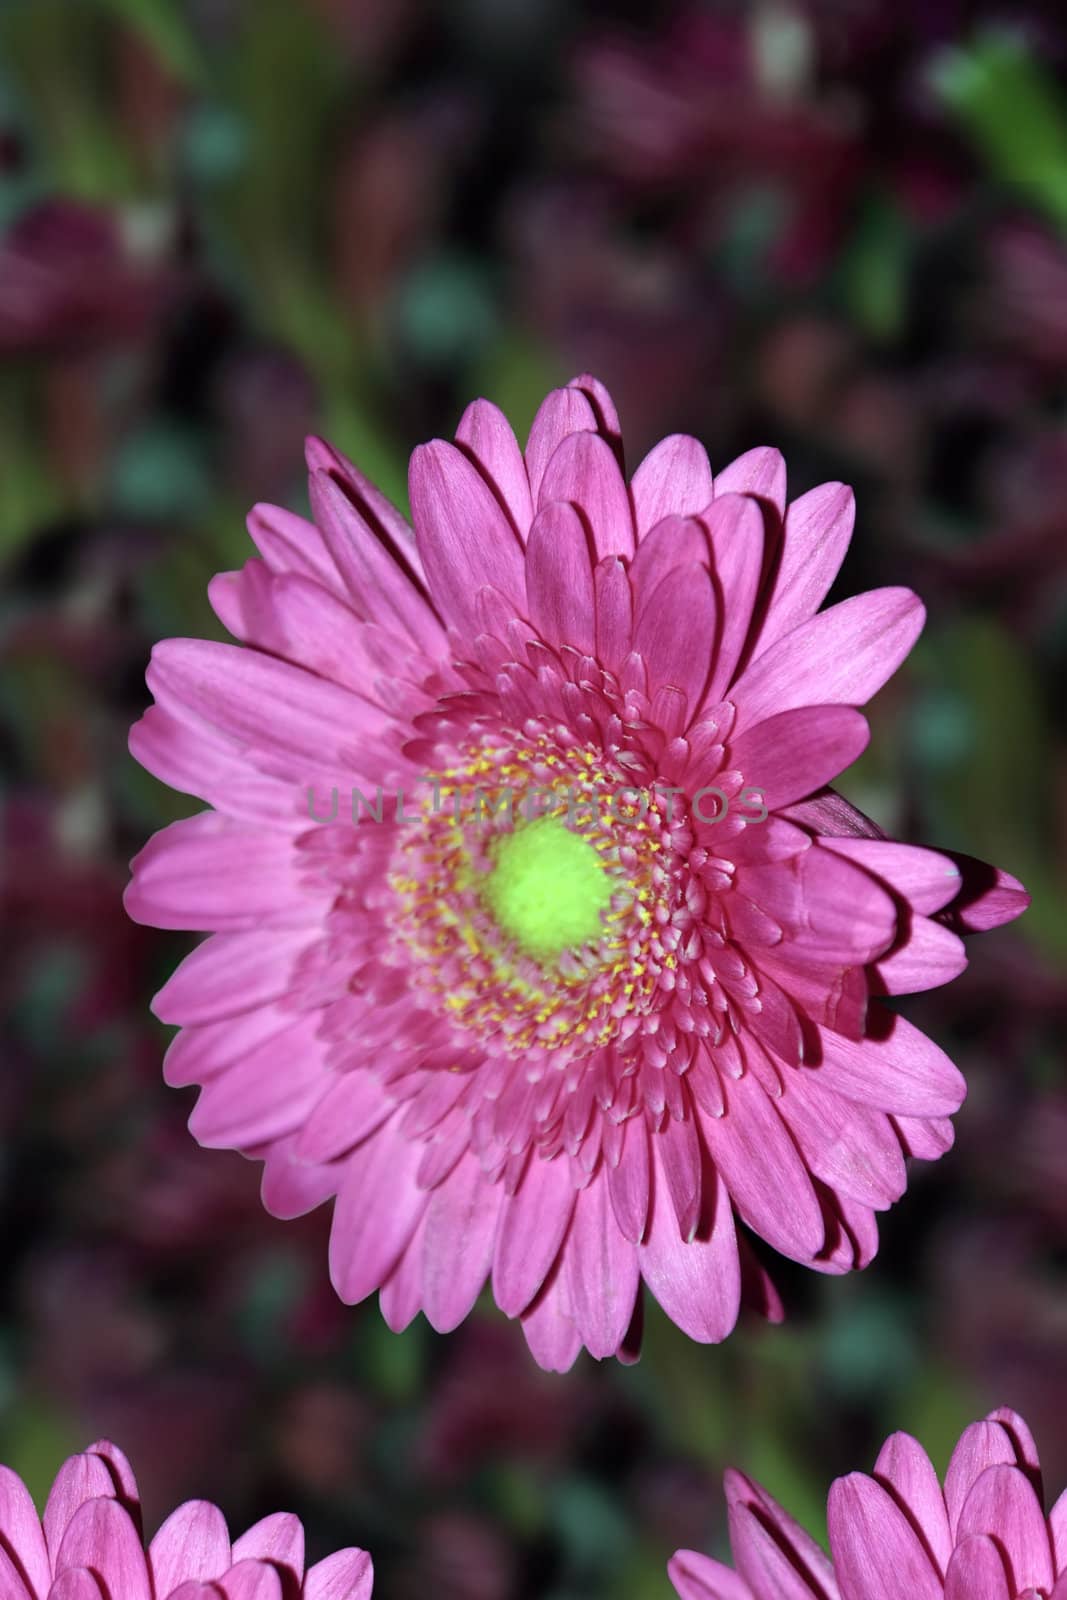 a single red chrysanthemum in detailed close up